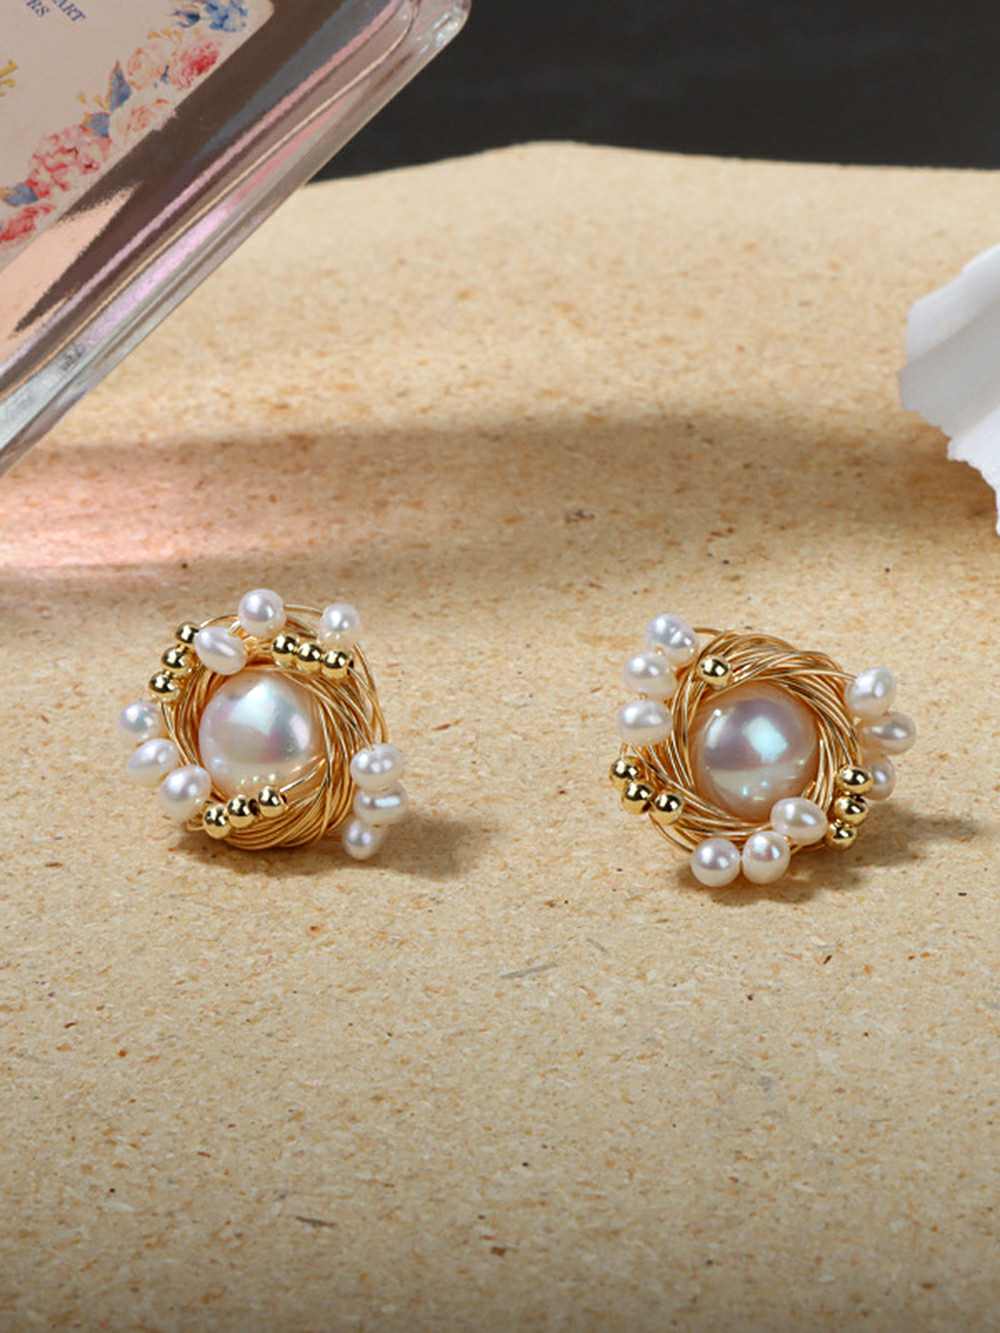 Vintage Handcrafted Bird's Nest Design Natural Pearl Earrings